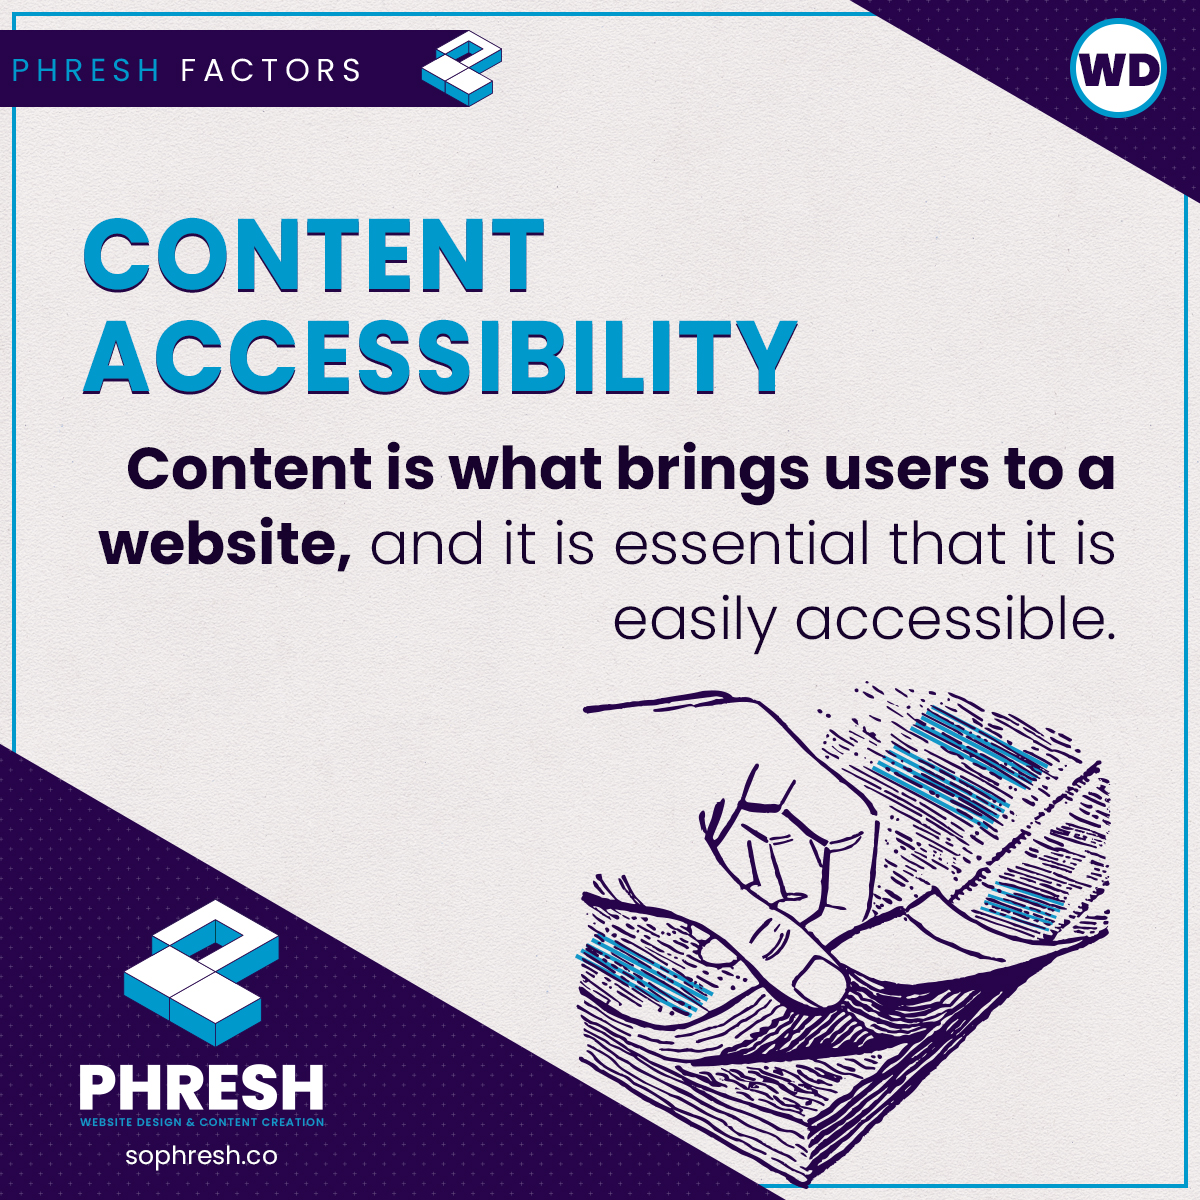 WD Content Accessibility